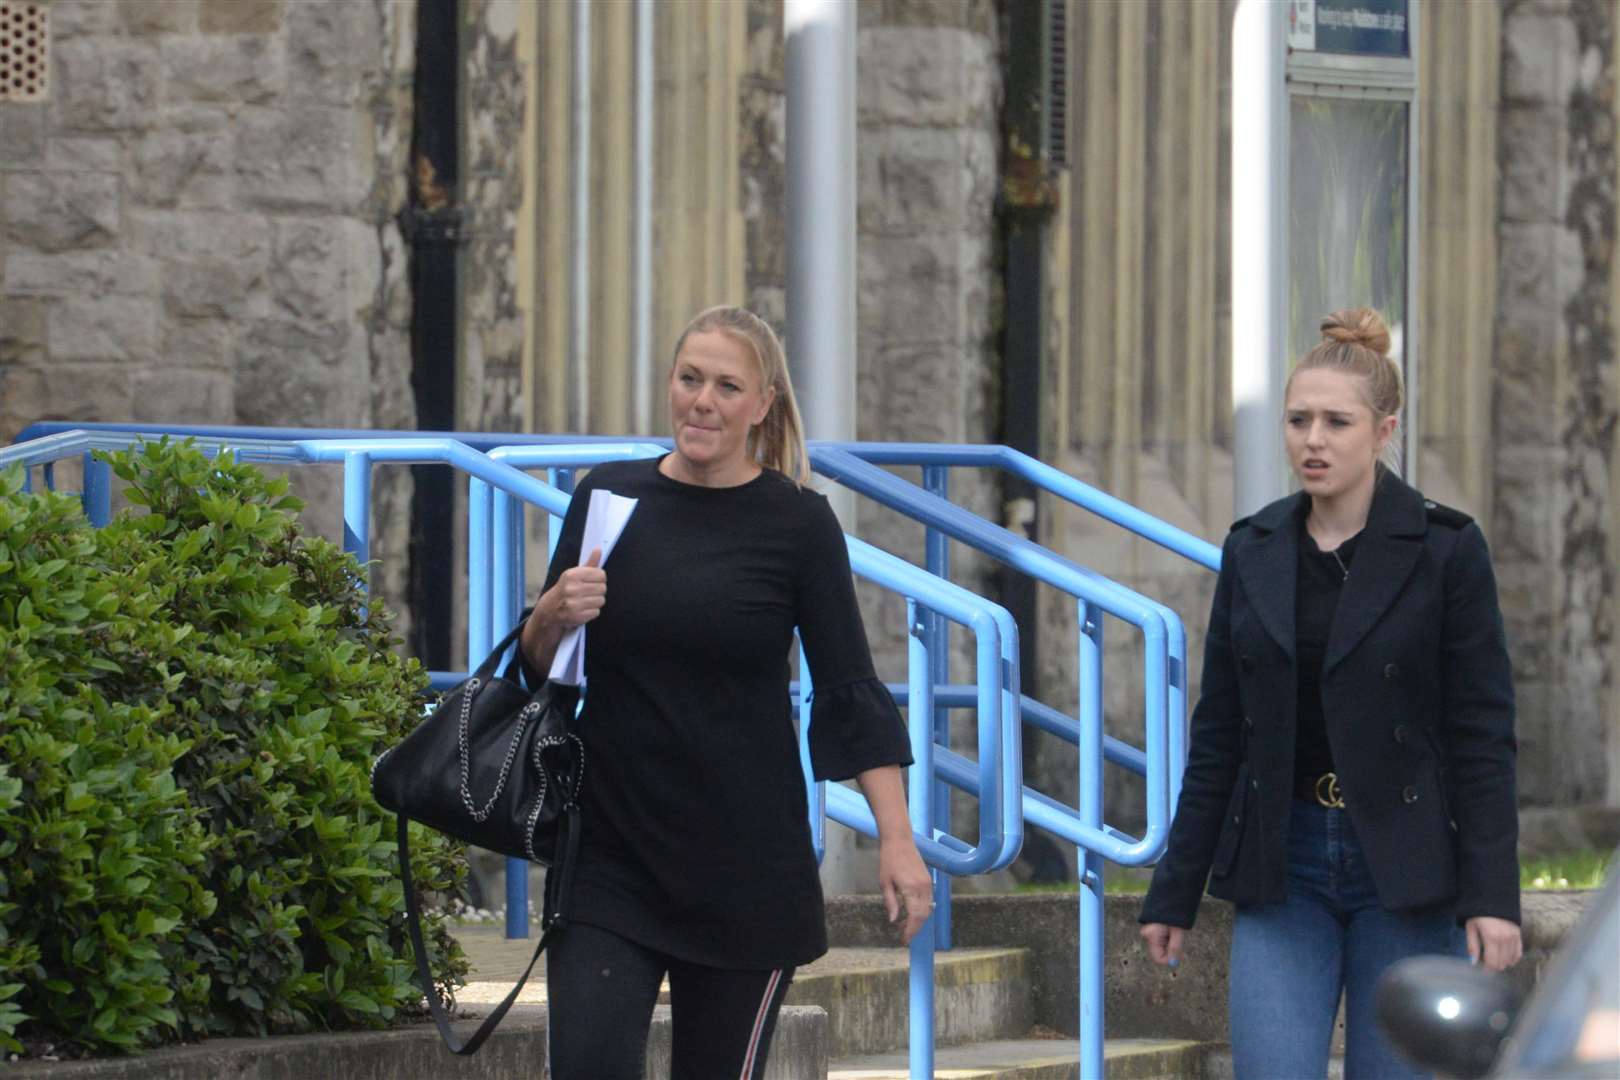 Julie and Olivia Cooke arriving at Maidstone Magistrates' Court. Picture: Chris Davey